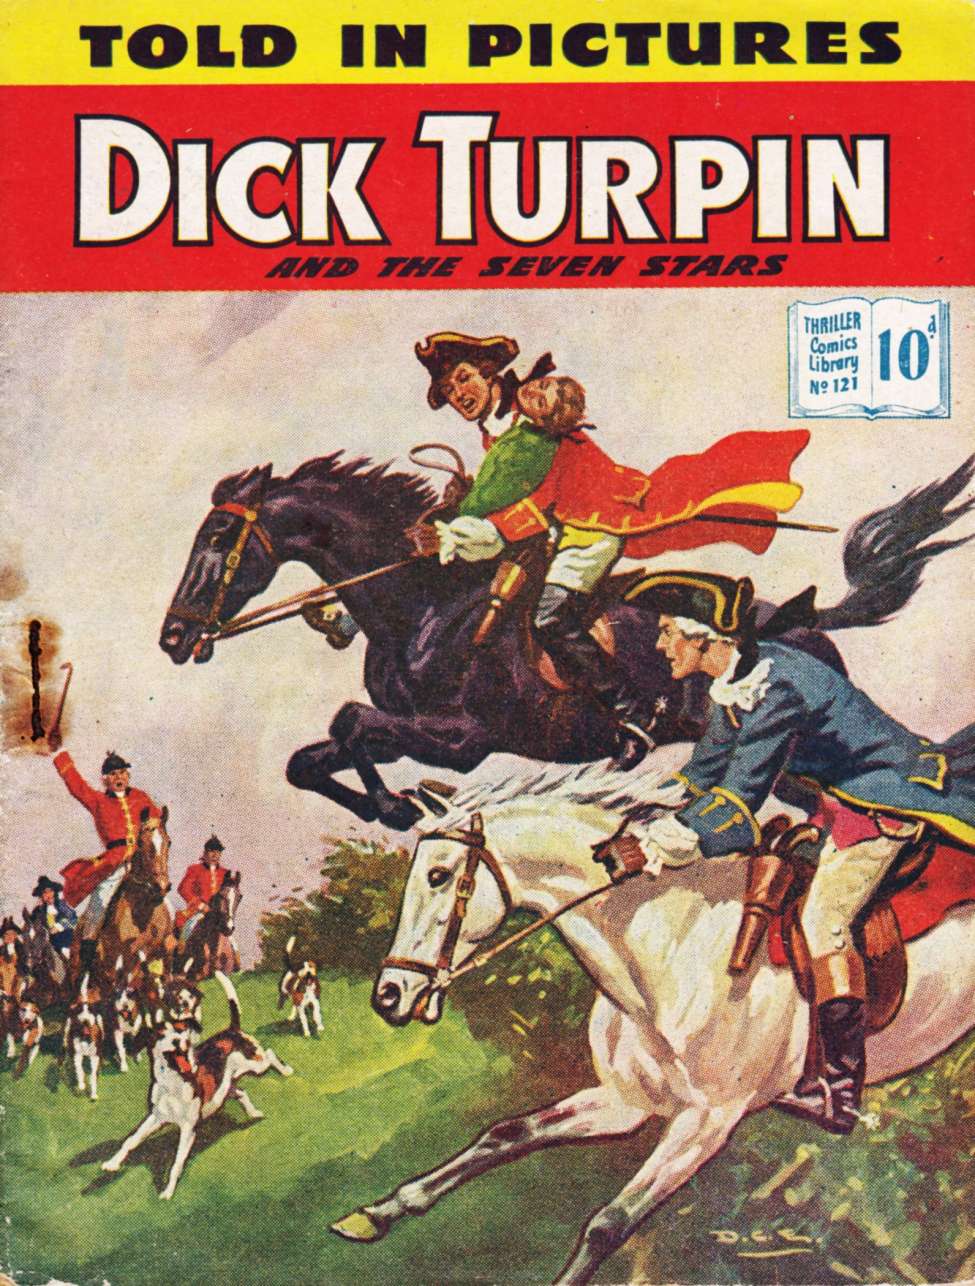 Book Cover For Thriller Comics Library 121 - Dick Turpin